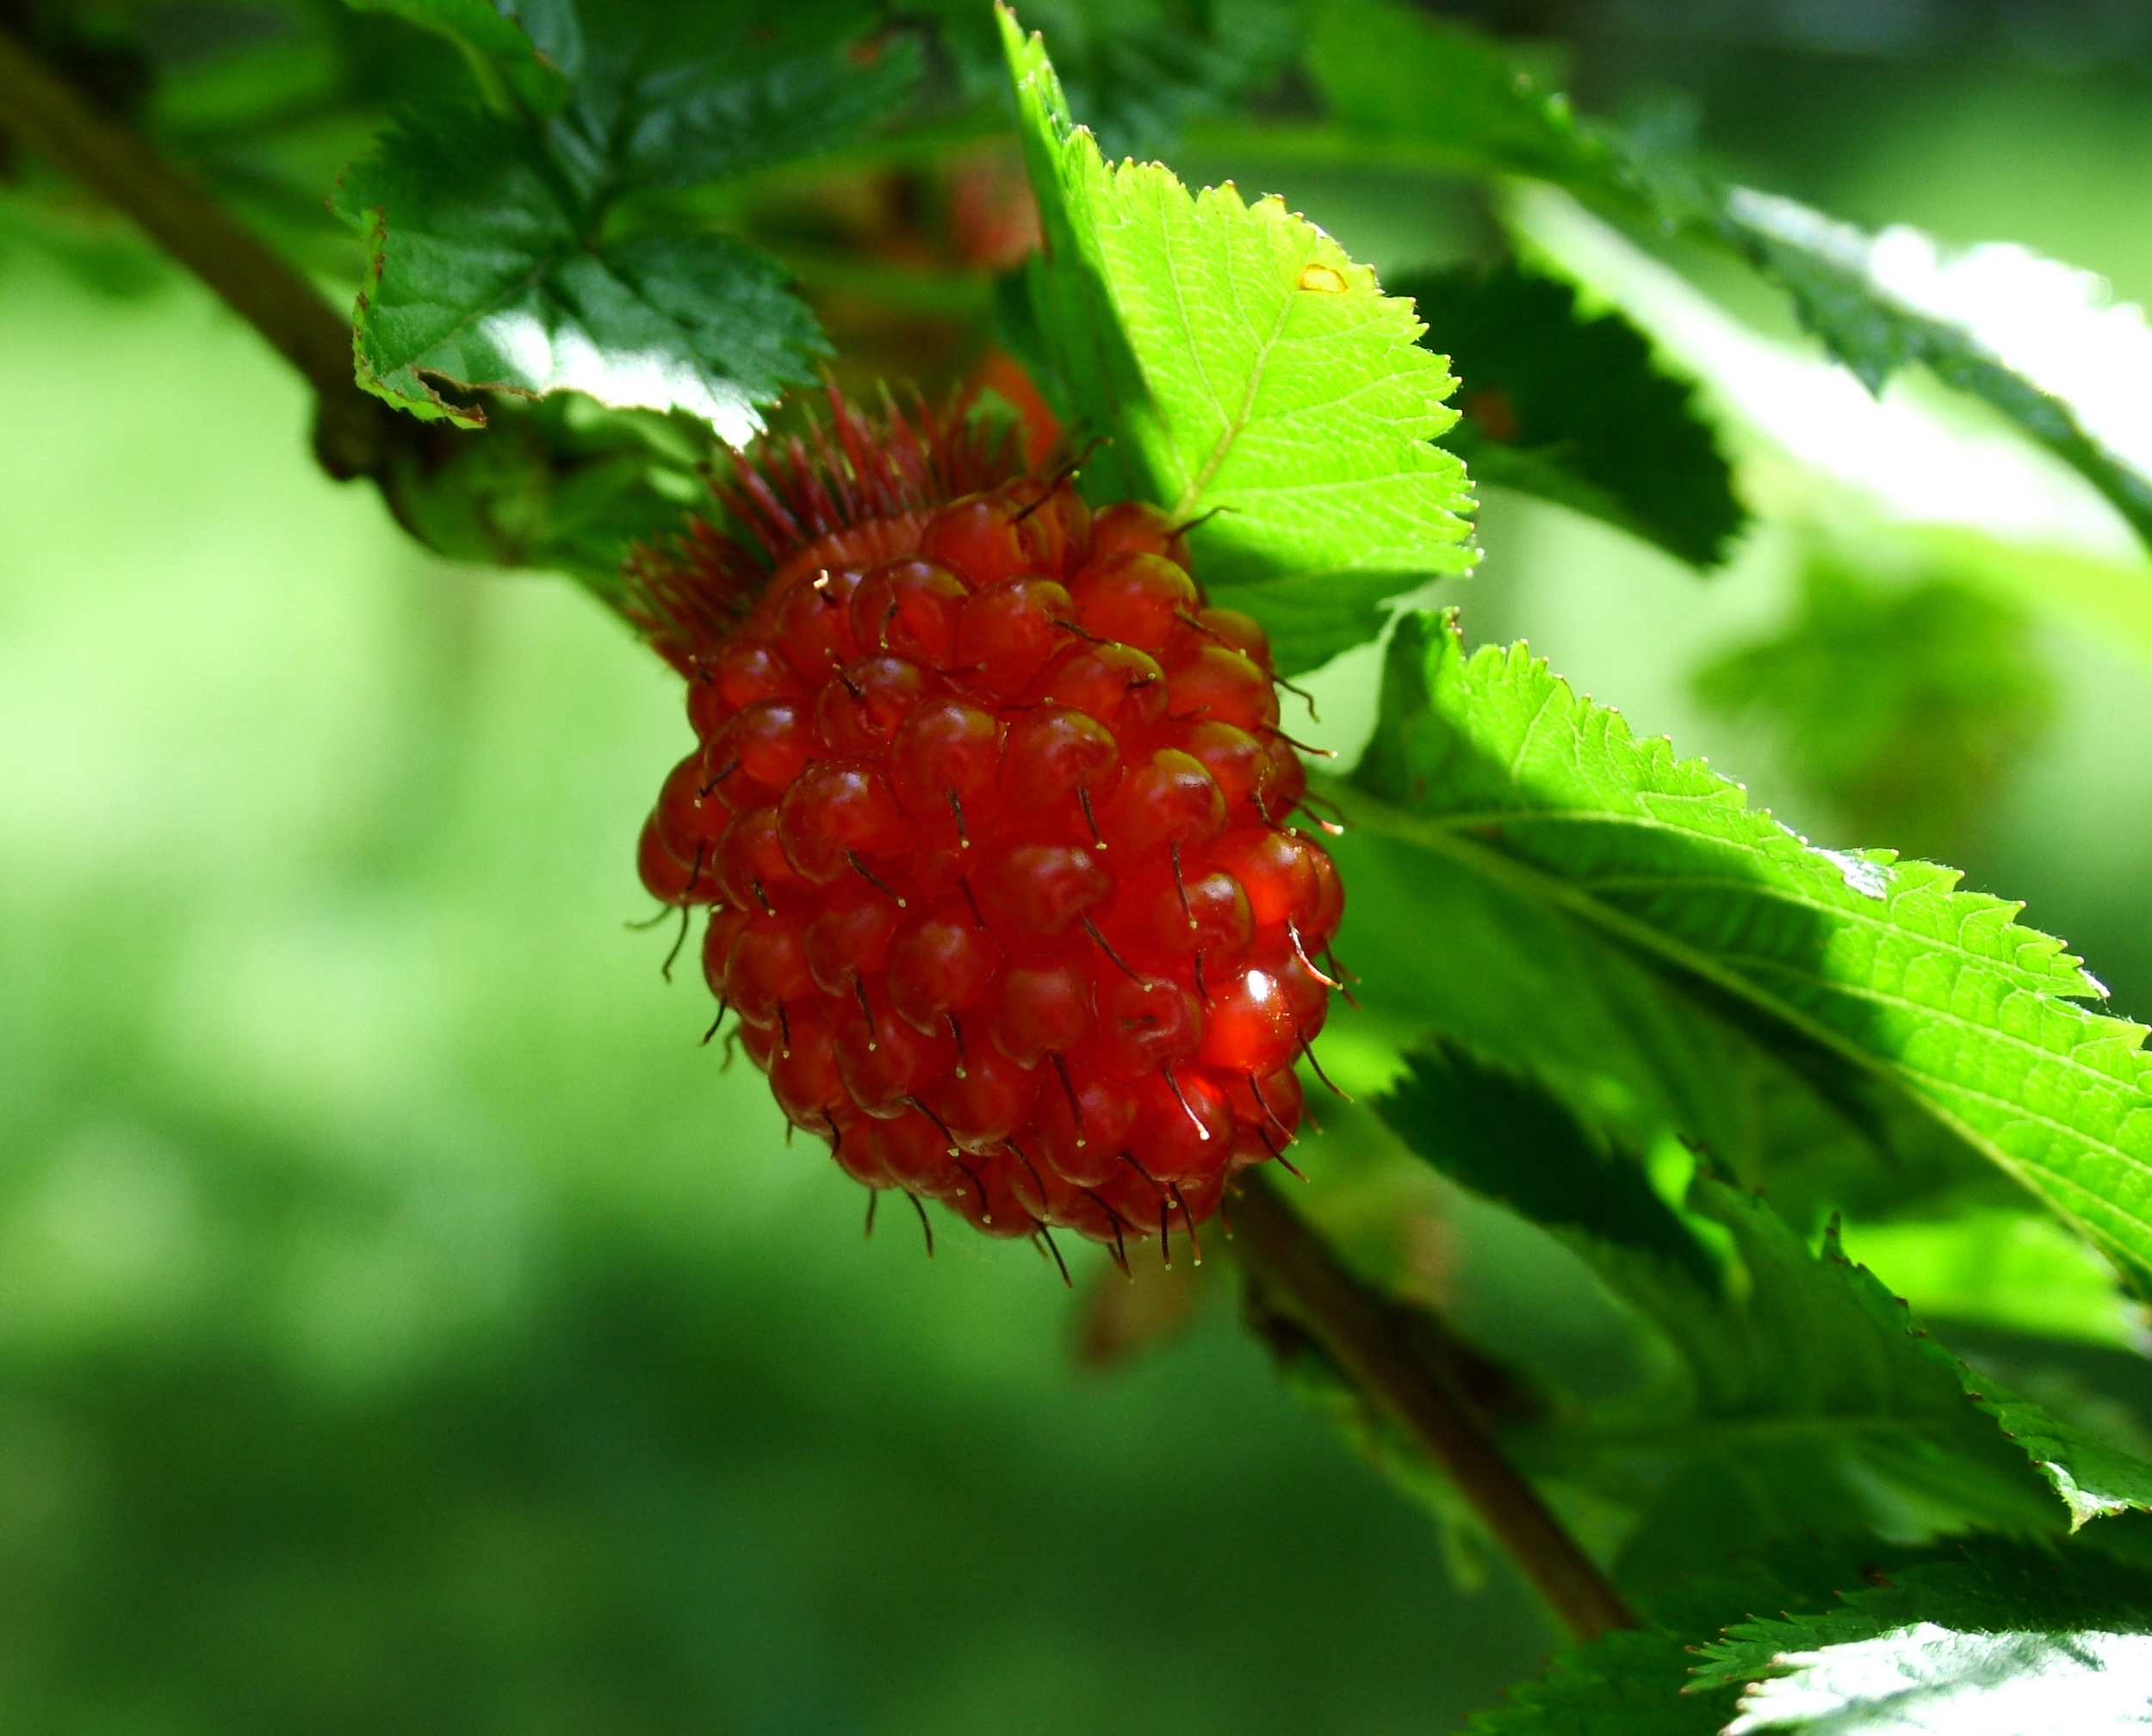 Images of Salmonberry